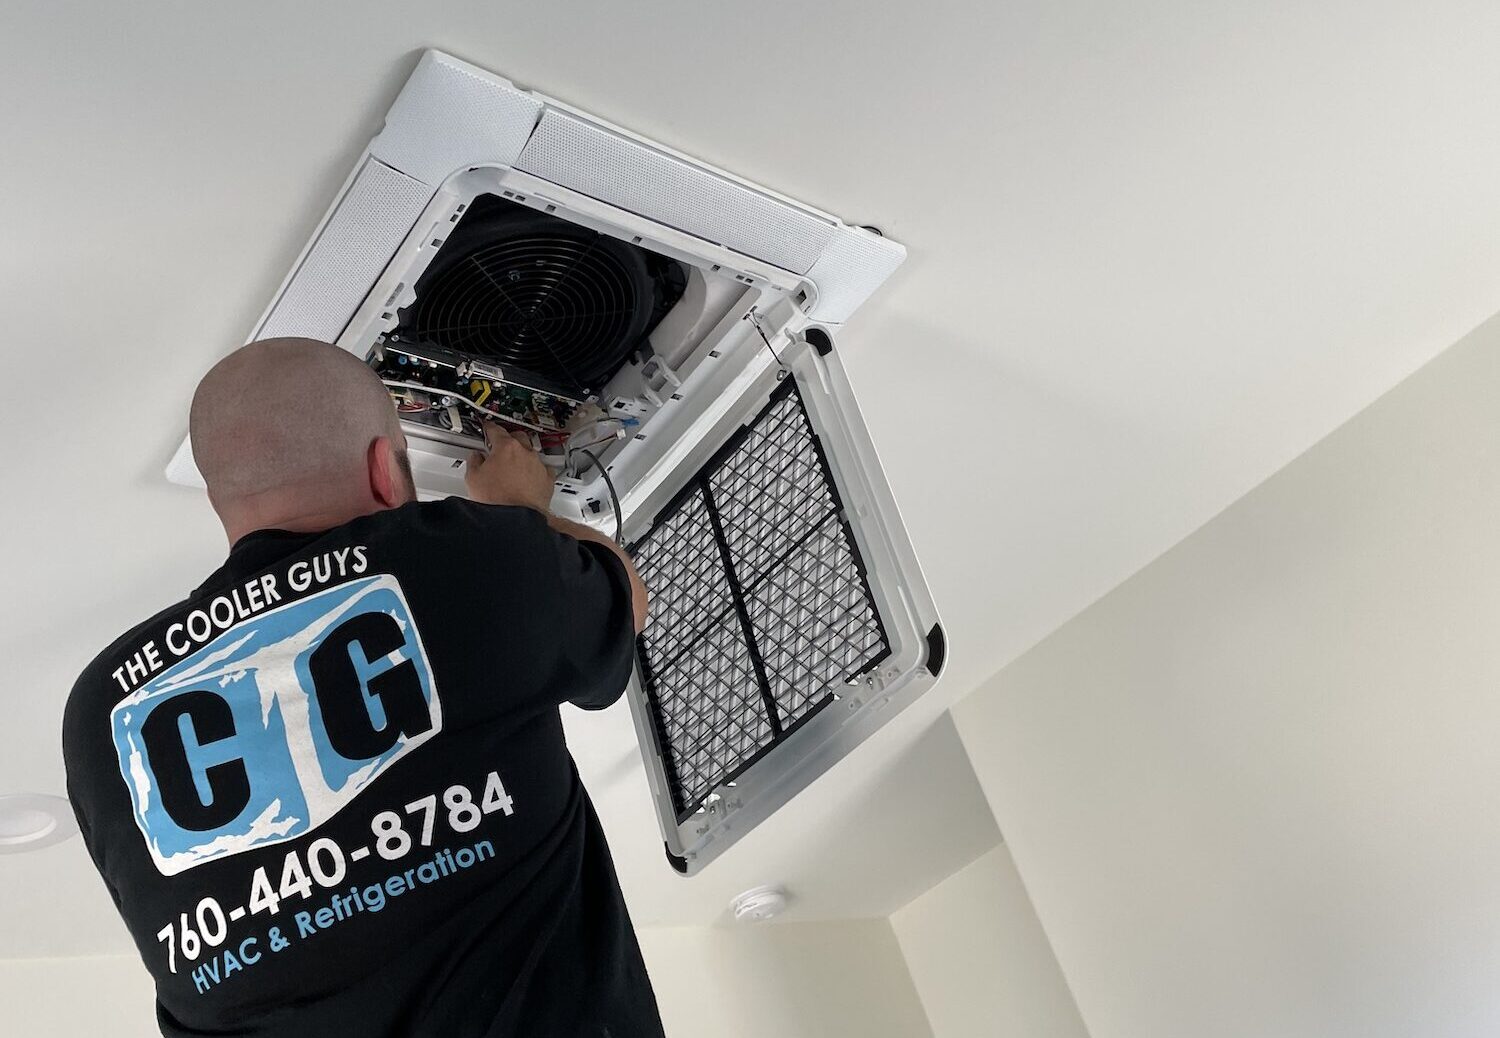 Air conditioning install and repair by the Cooler Guys